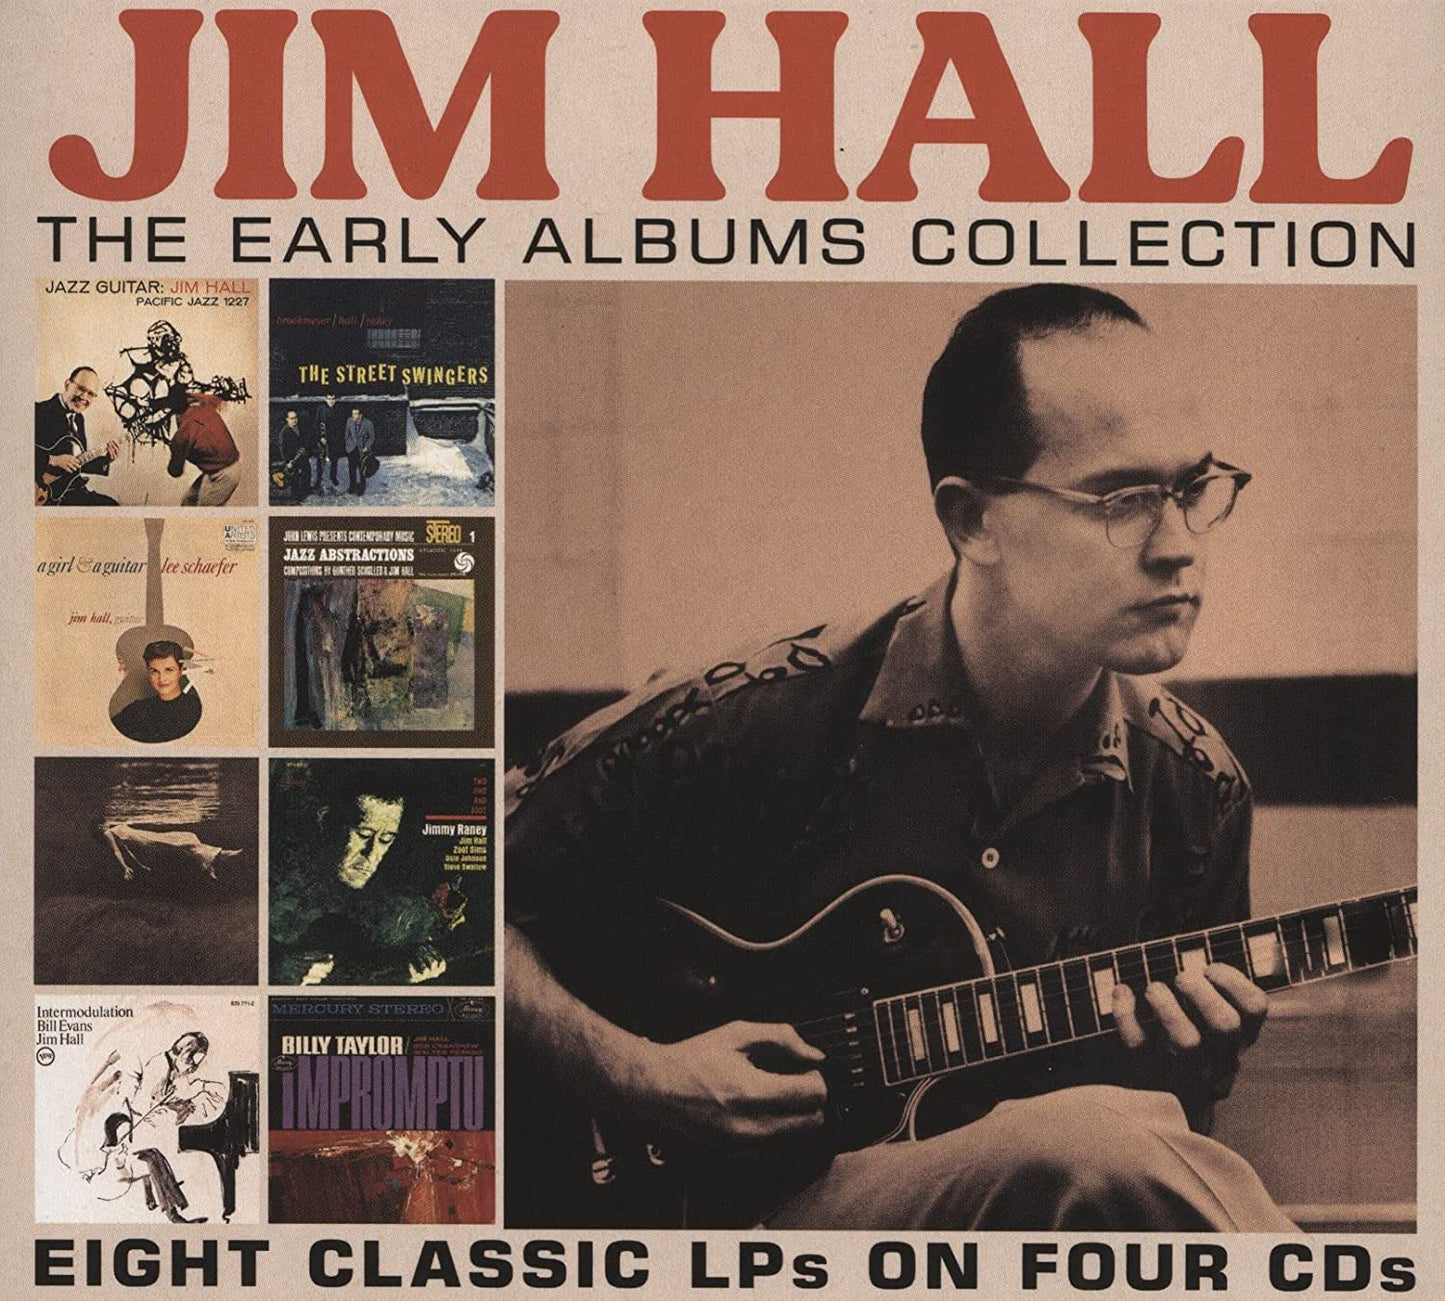 Jim Hall: The Early Albums Collection (4 CDs)